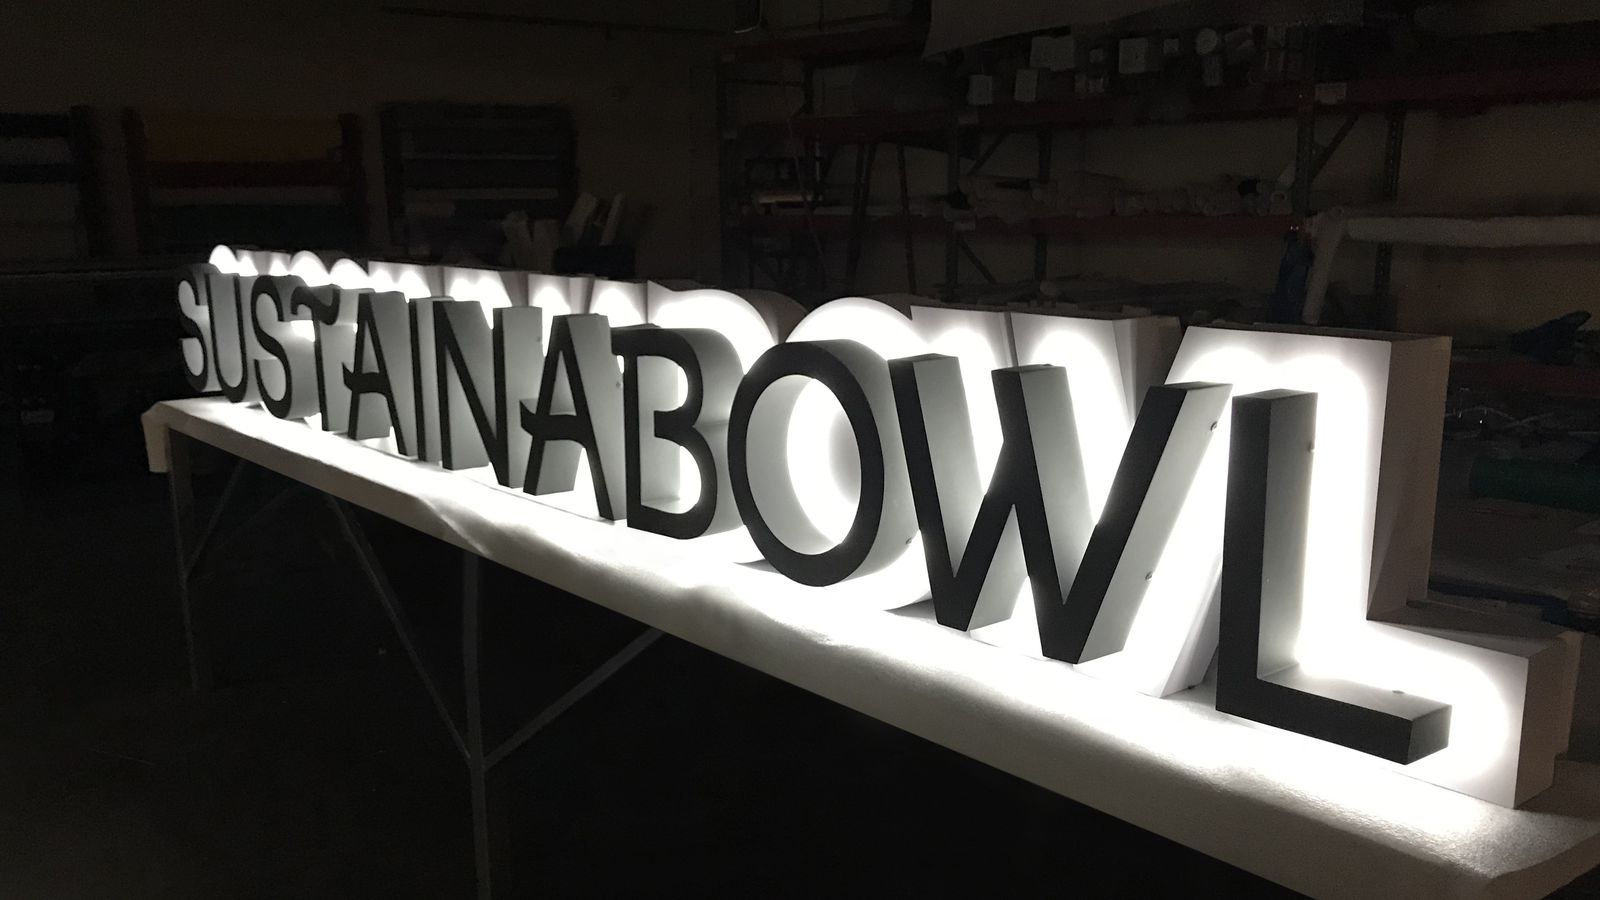 sustainabowl illuminated channel letters